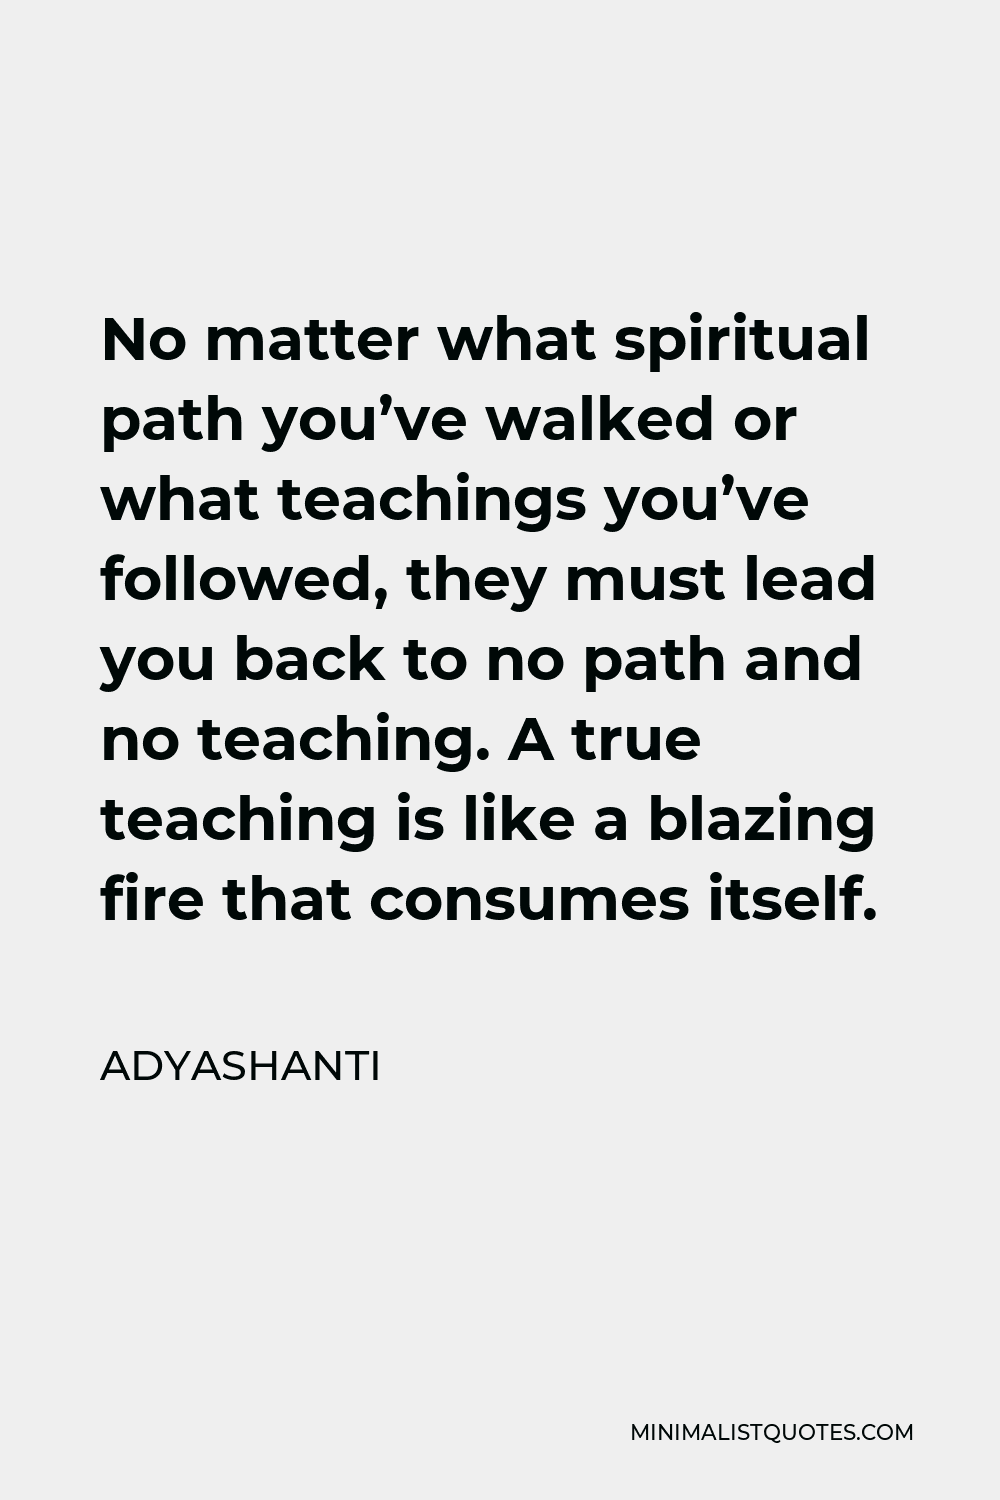 Adyashanti Quote - No matter what spiritual path you’ve walked or what teachings you’ve followed, they must lead you back to no path and no teaching. A true teaching is like a blazing fire that consumes itself.